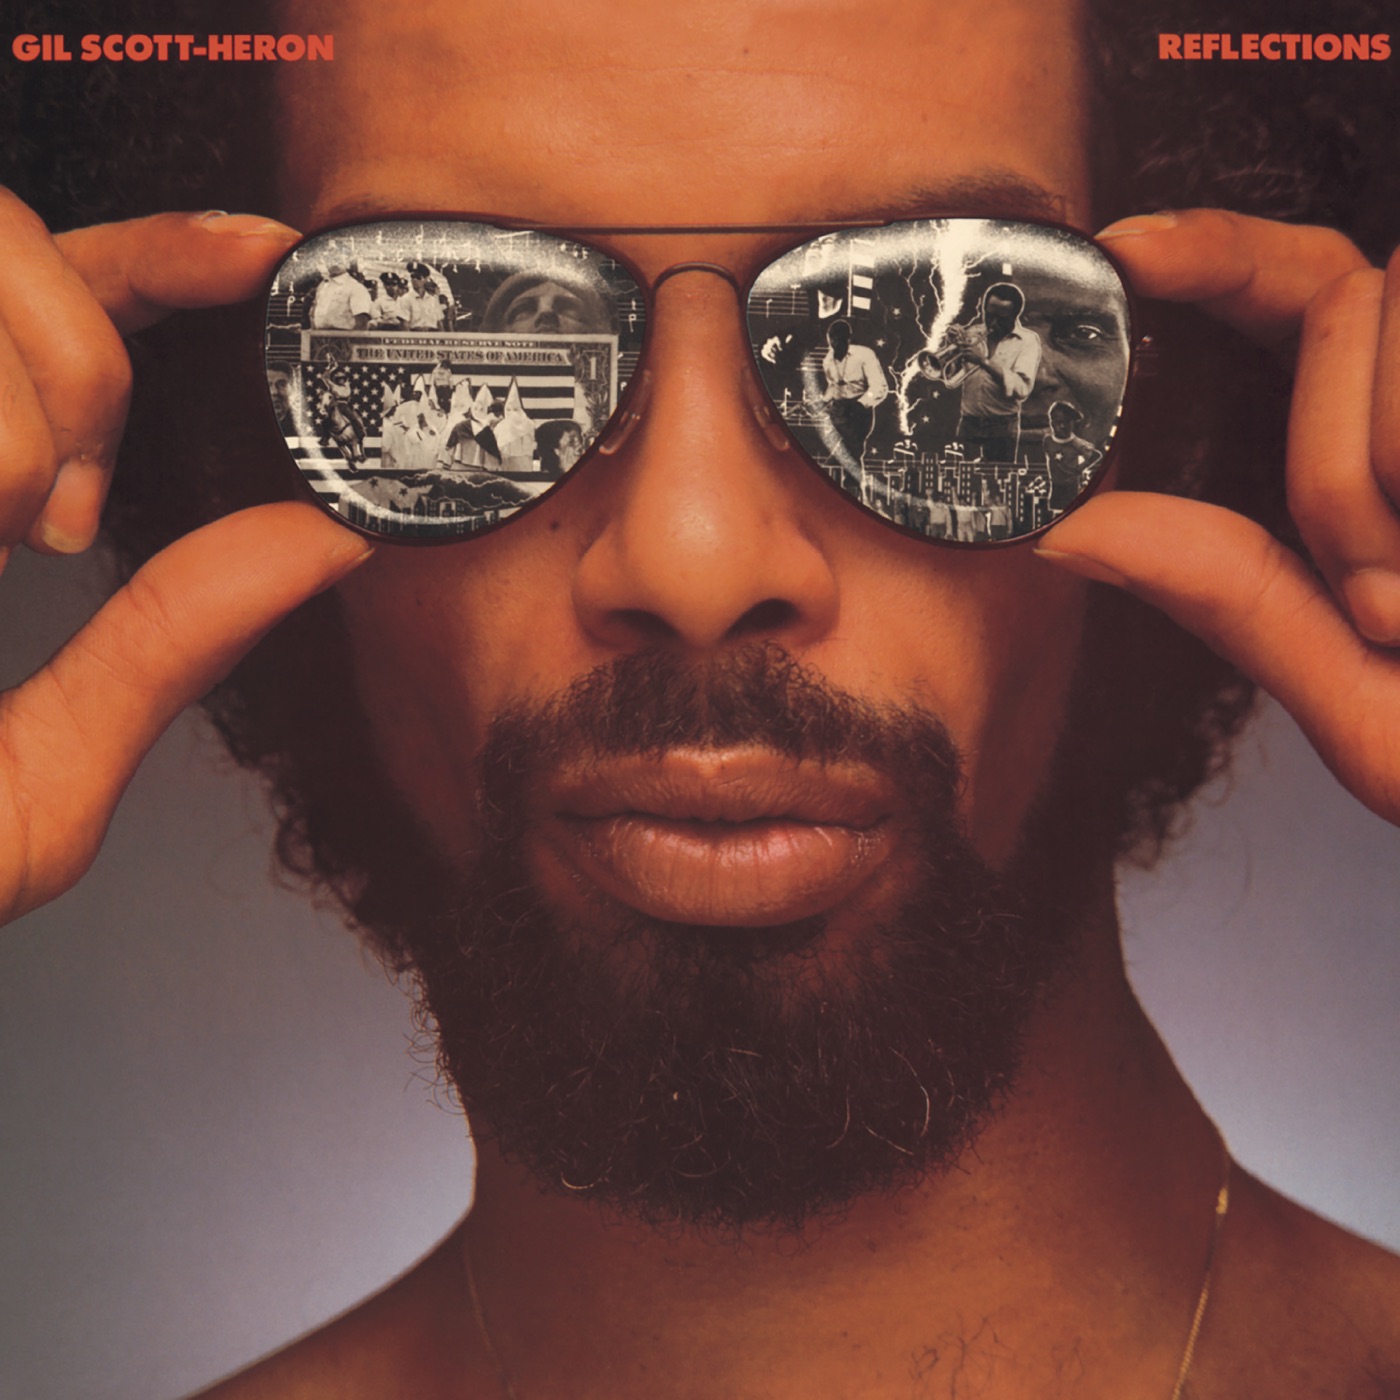 Reflections by Gil Scott-Heron